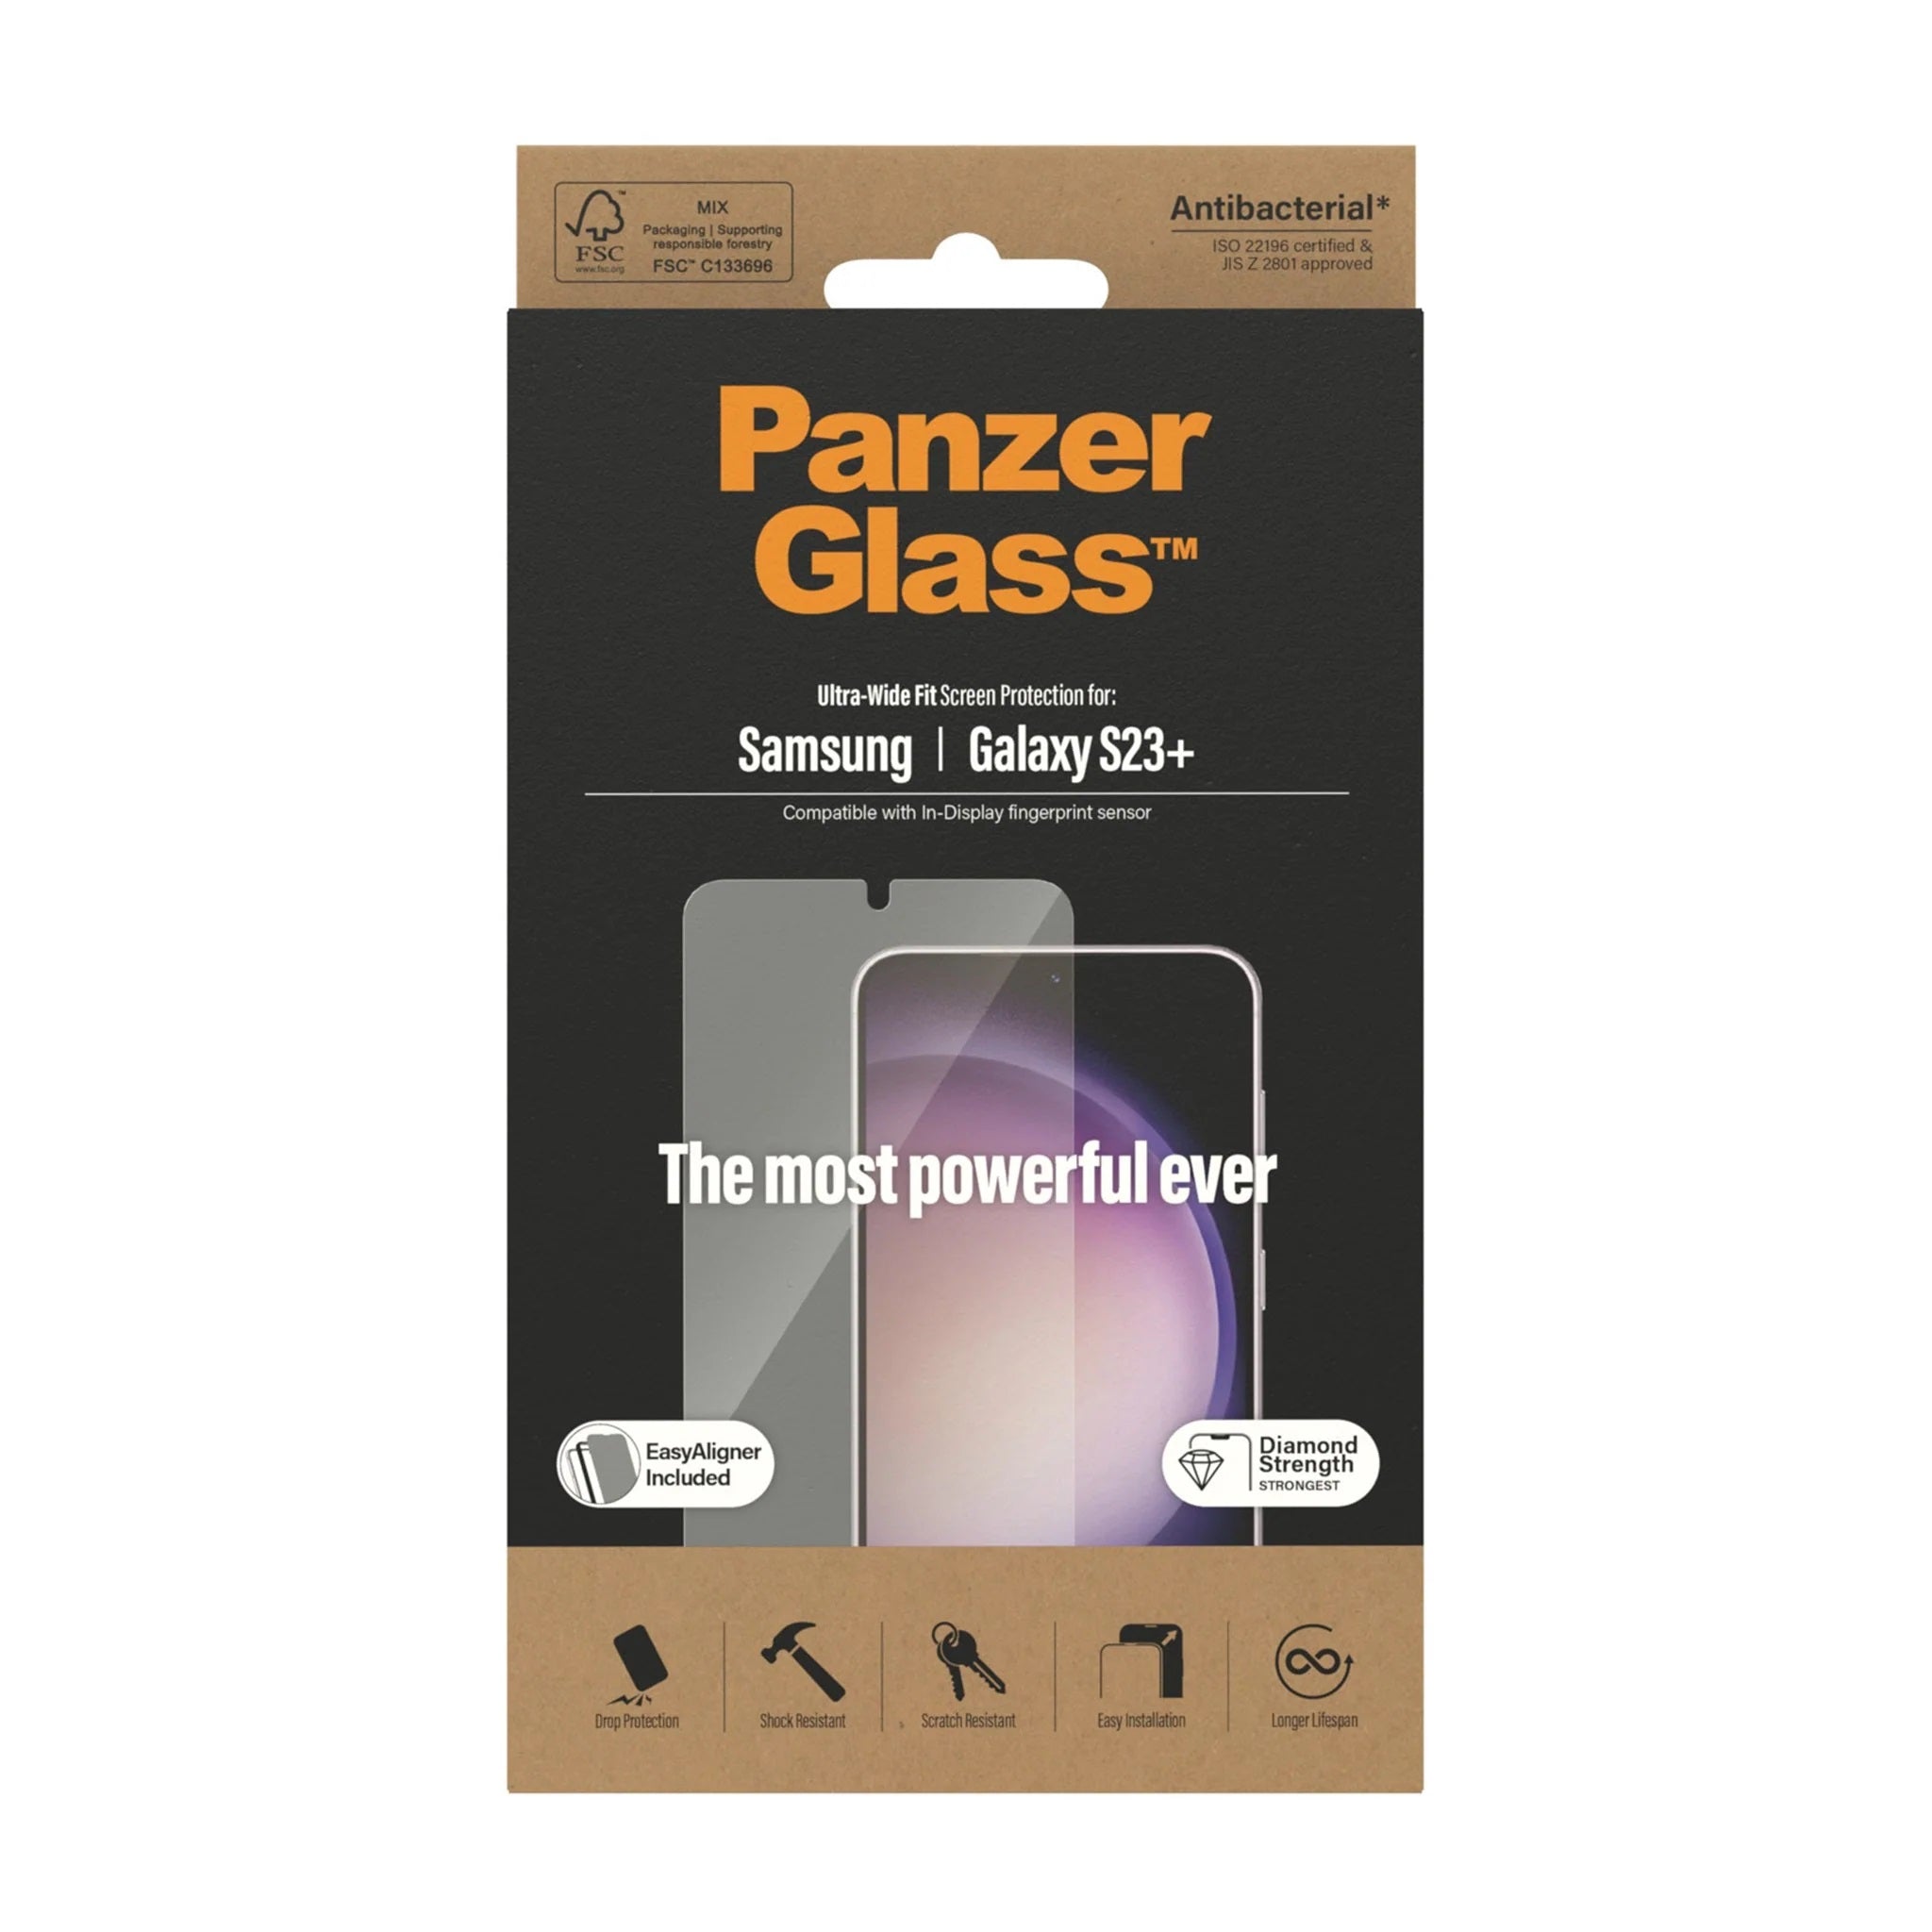 PanzerGlass™ Ultra-Wide fit with EasyAligner Screen Protector for Samsung Galaxy S23 Plus.